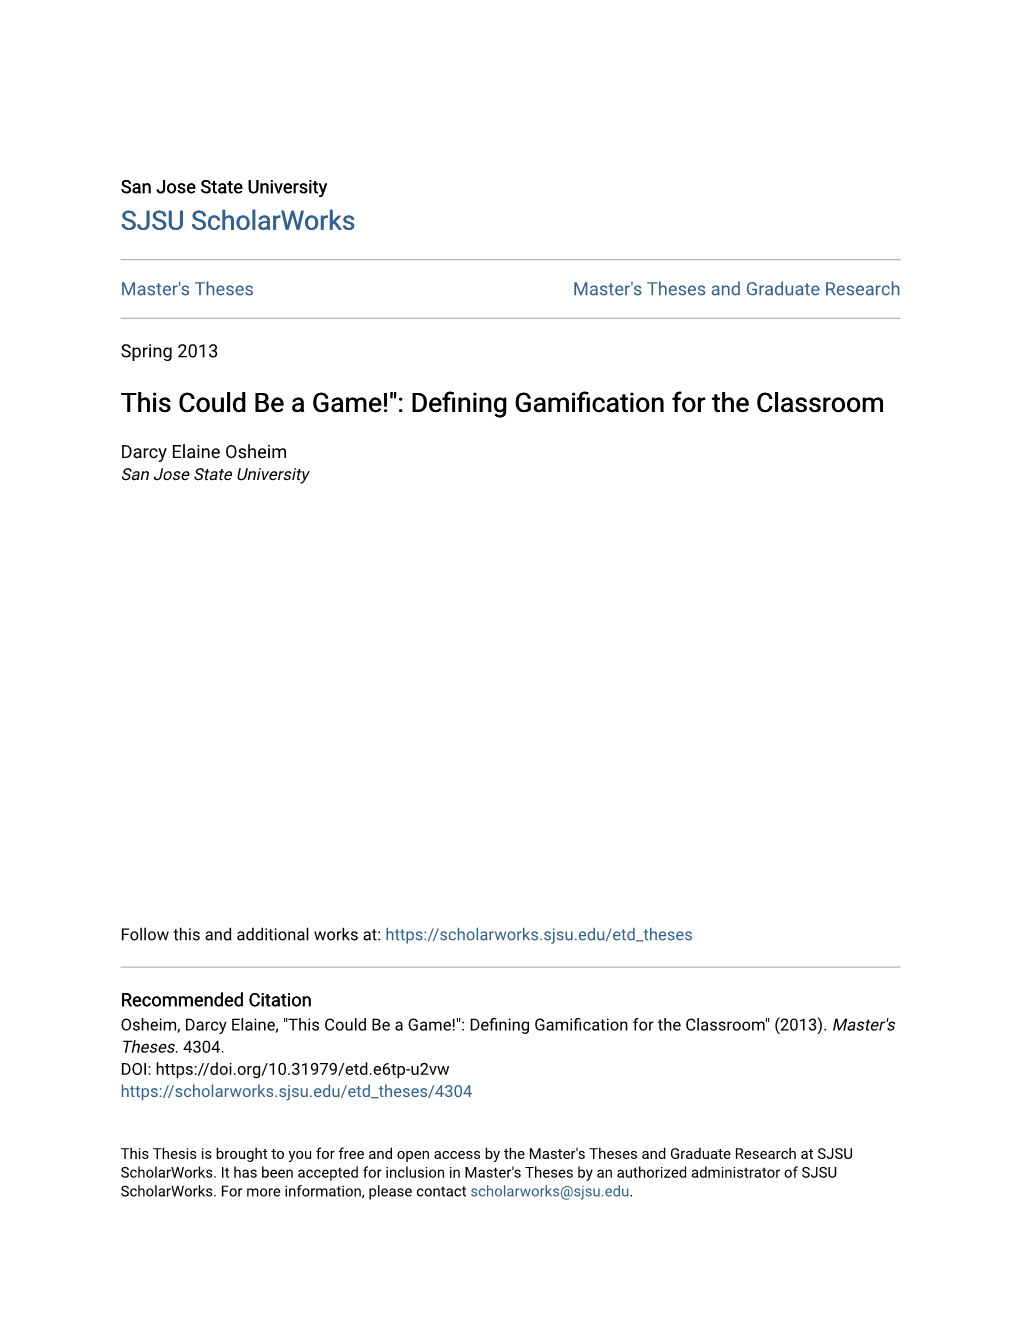 This Could Be a Game!": Defining Gamification for the Classroom